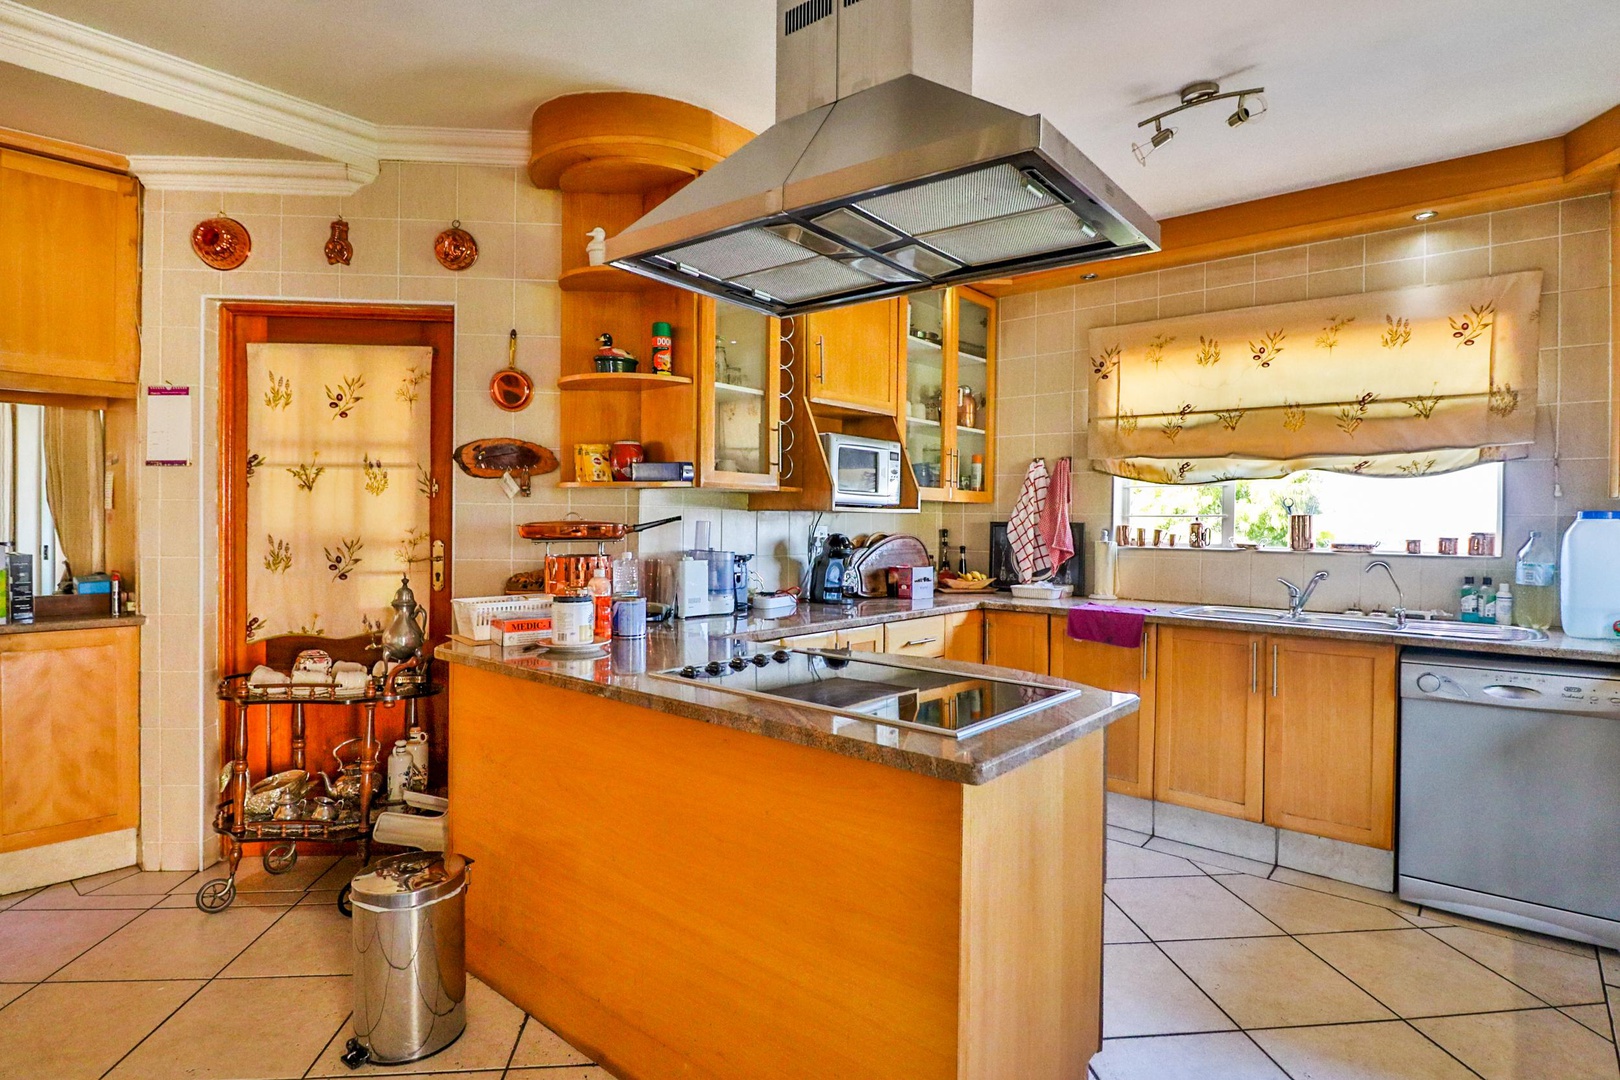 House in Kosmos - Kitchen is really spacious with plenty of storage space and worktop area